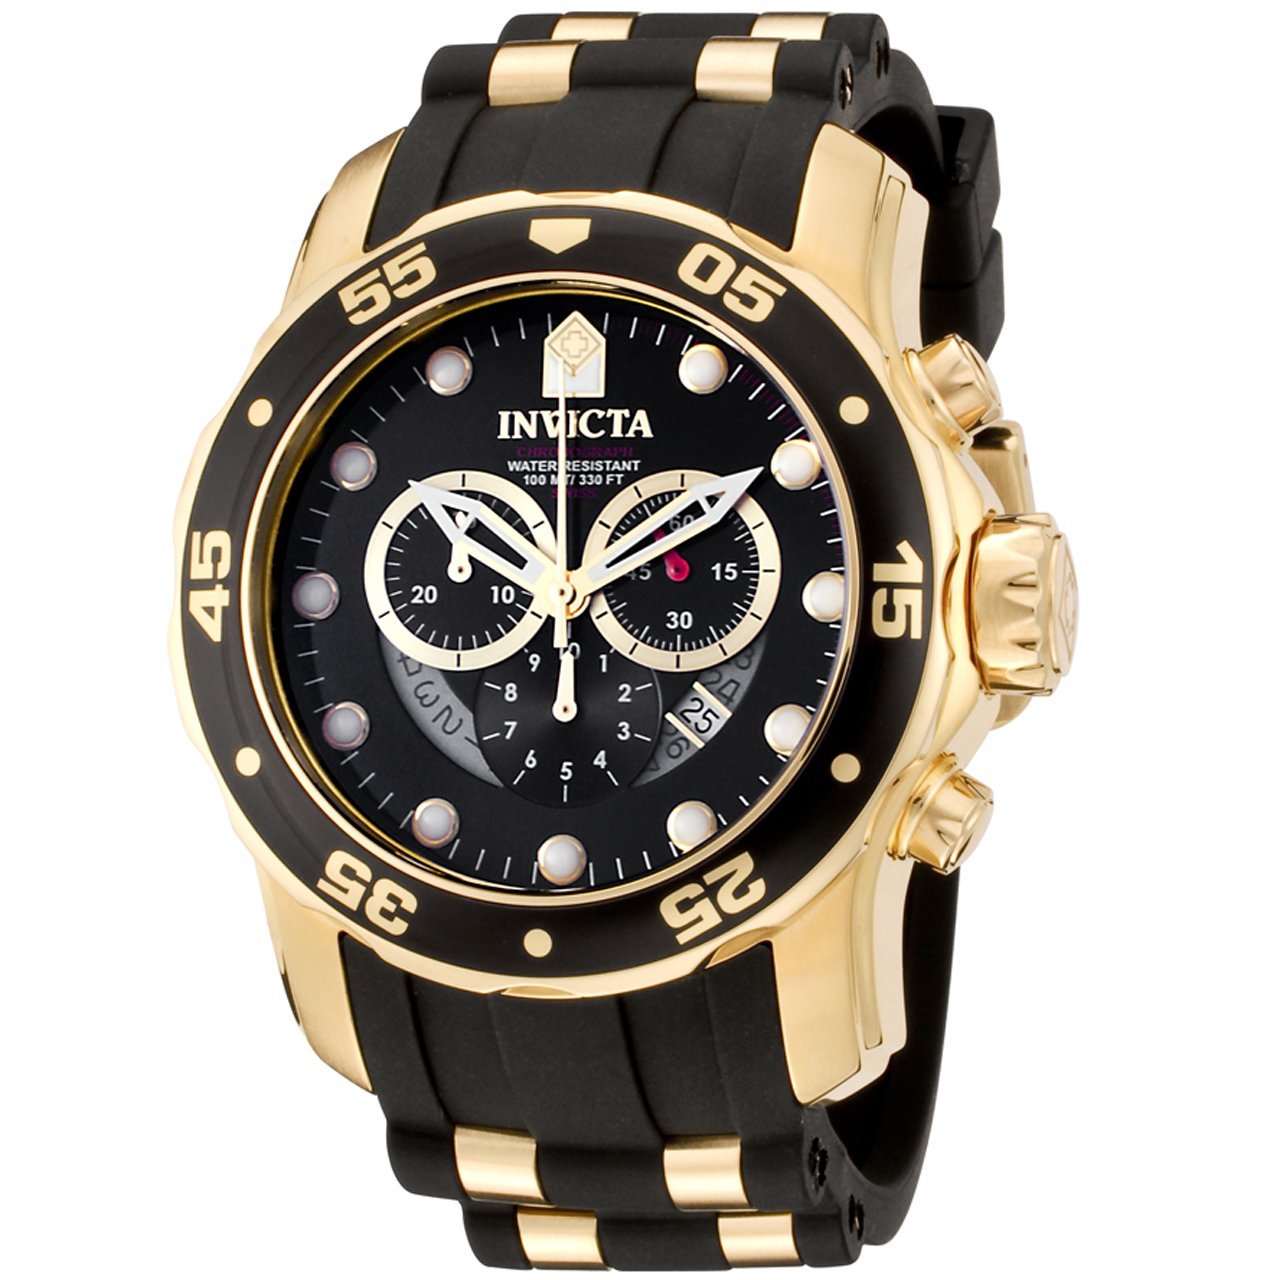 Invicta Watches - At Affordable Prices Unmatched Standard - Fan of